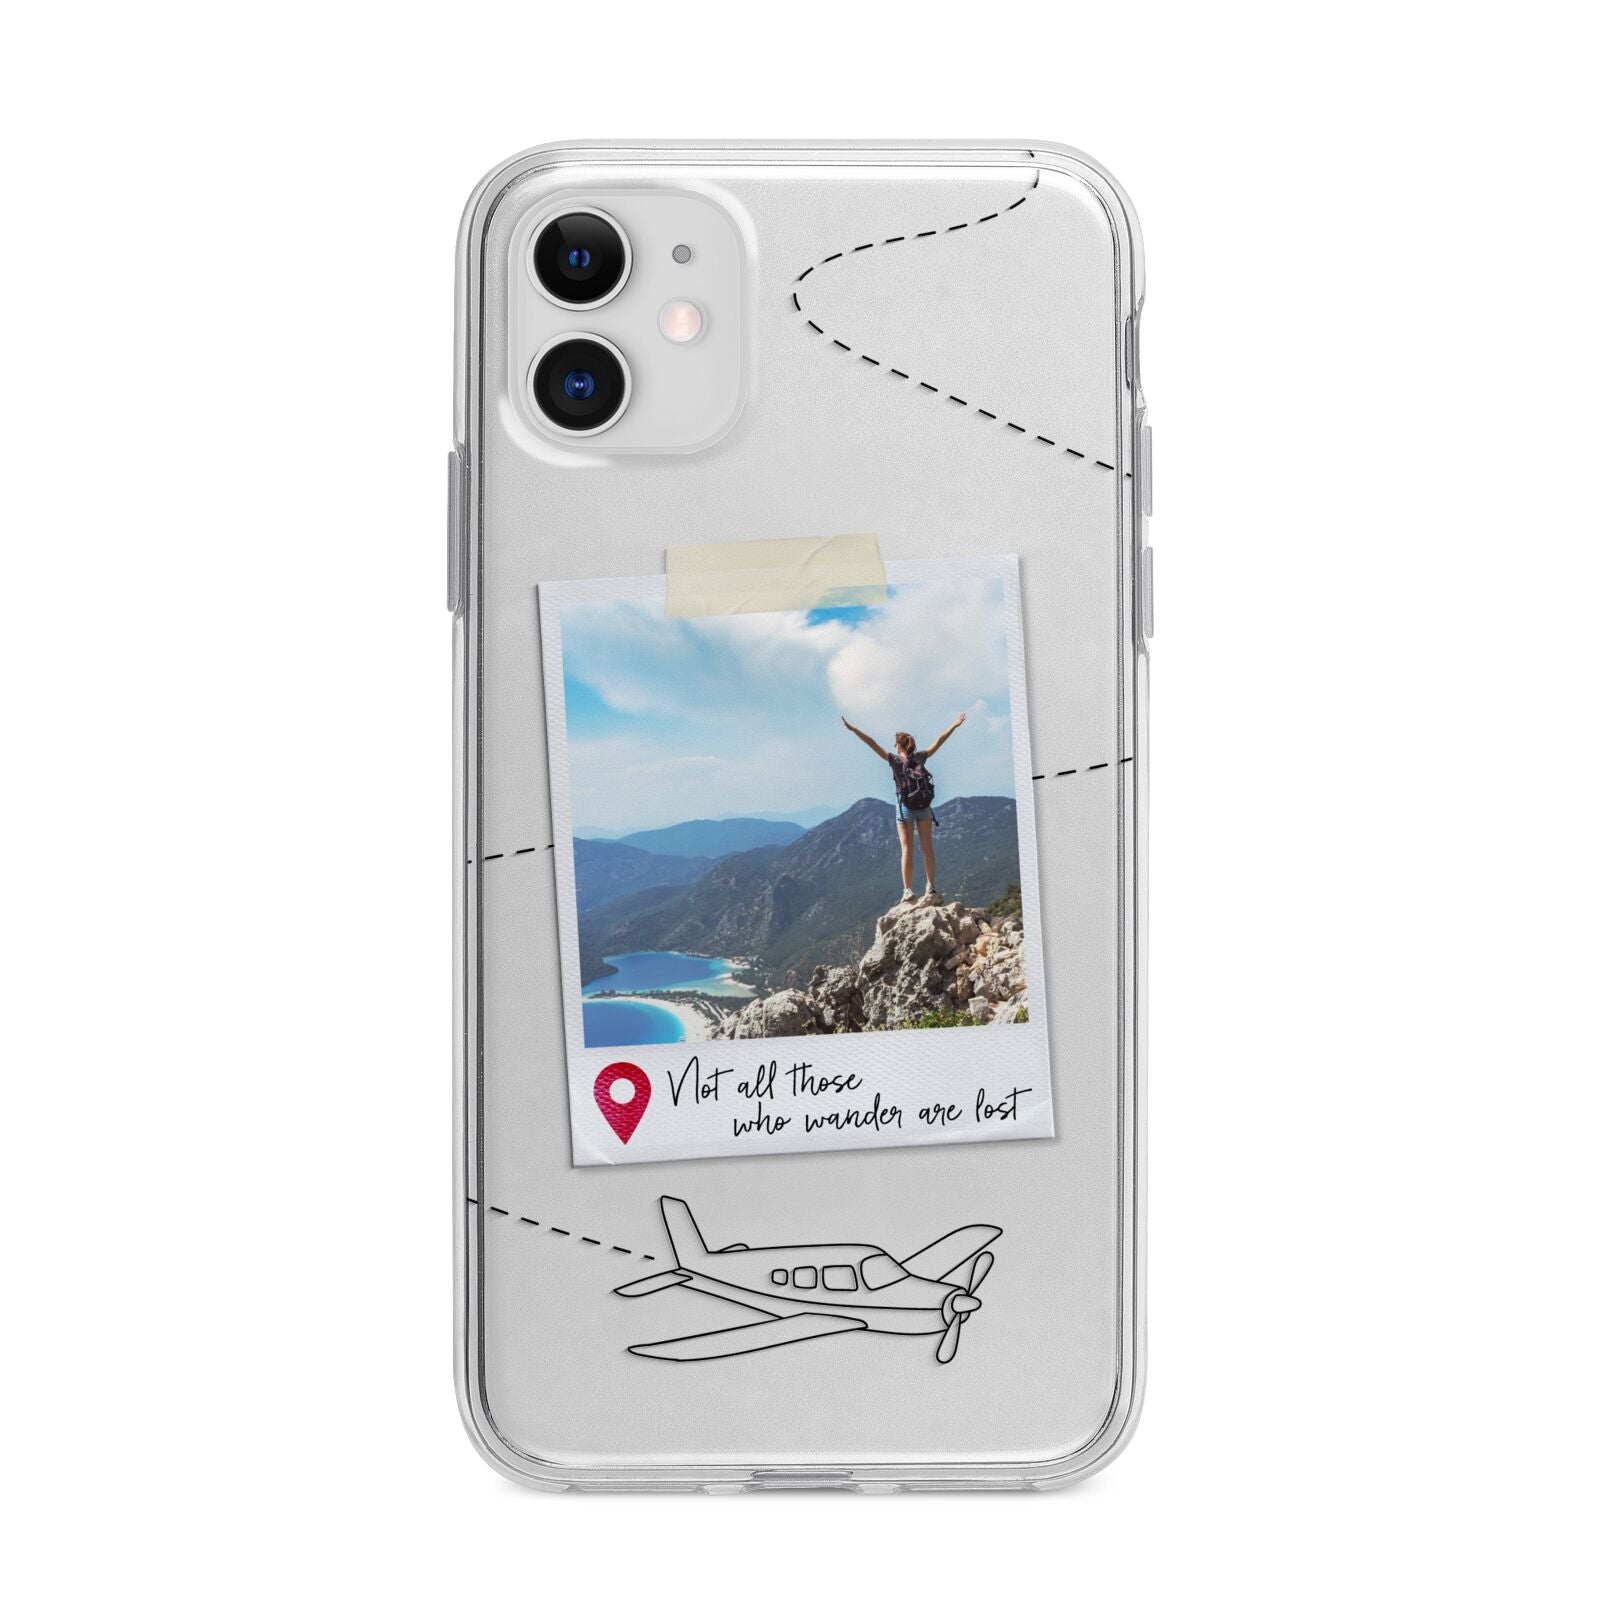 Backpacker Photo Upload Personalised Apple iPhone 11 in White with Bumper Case